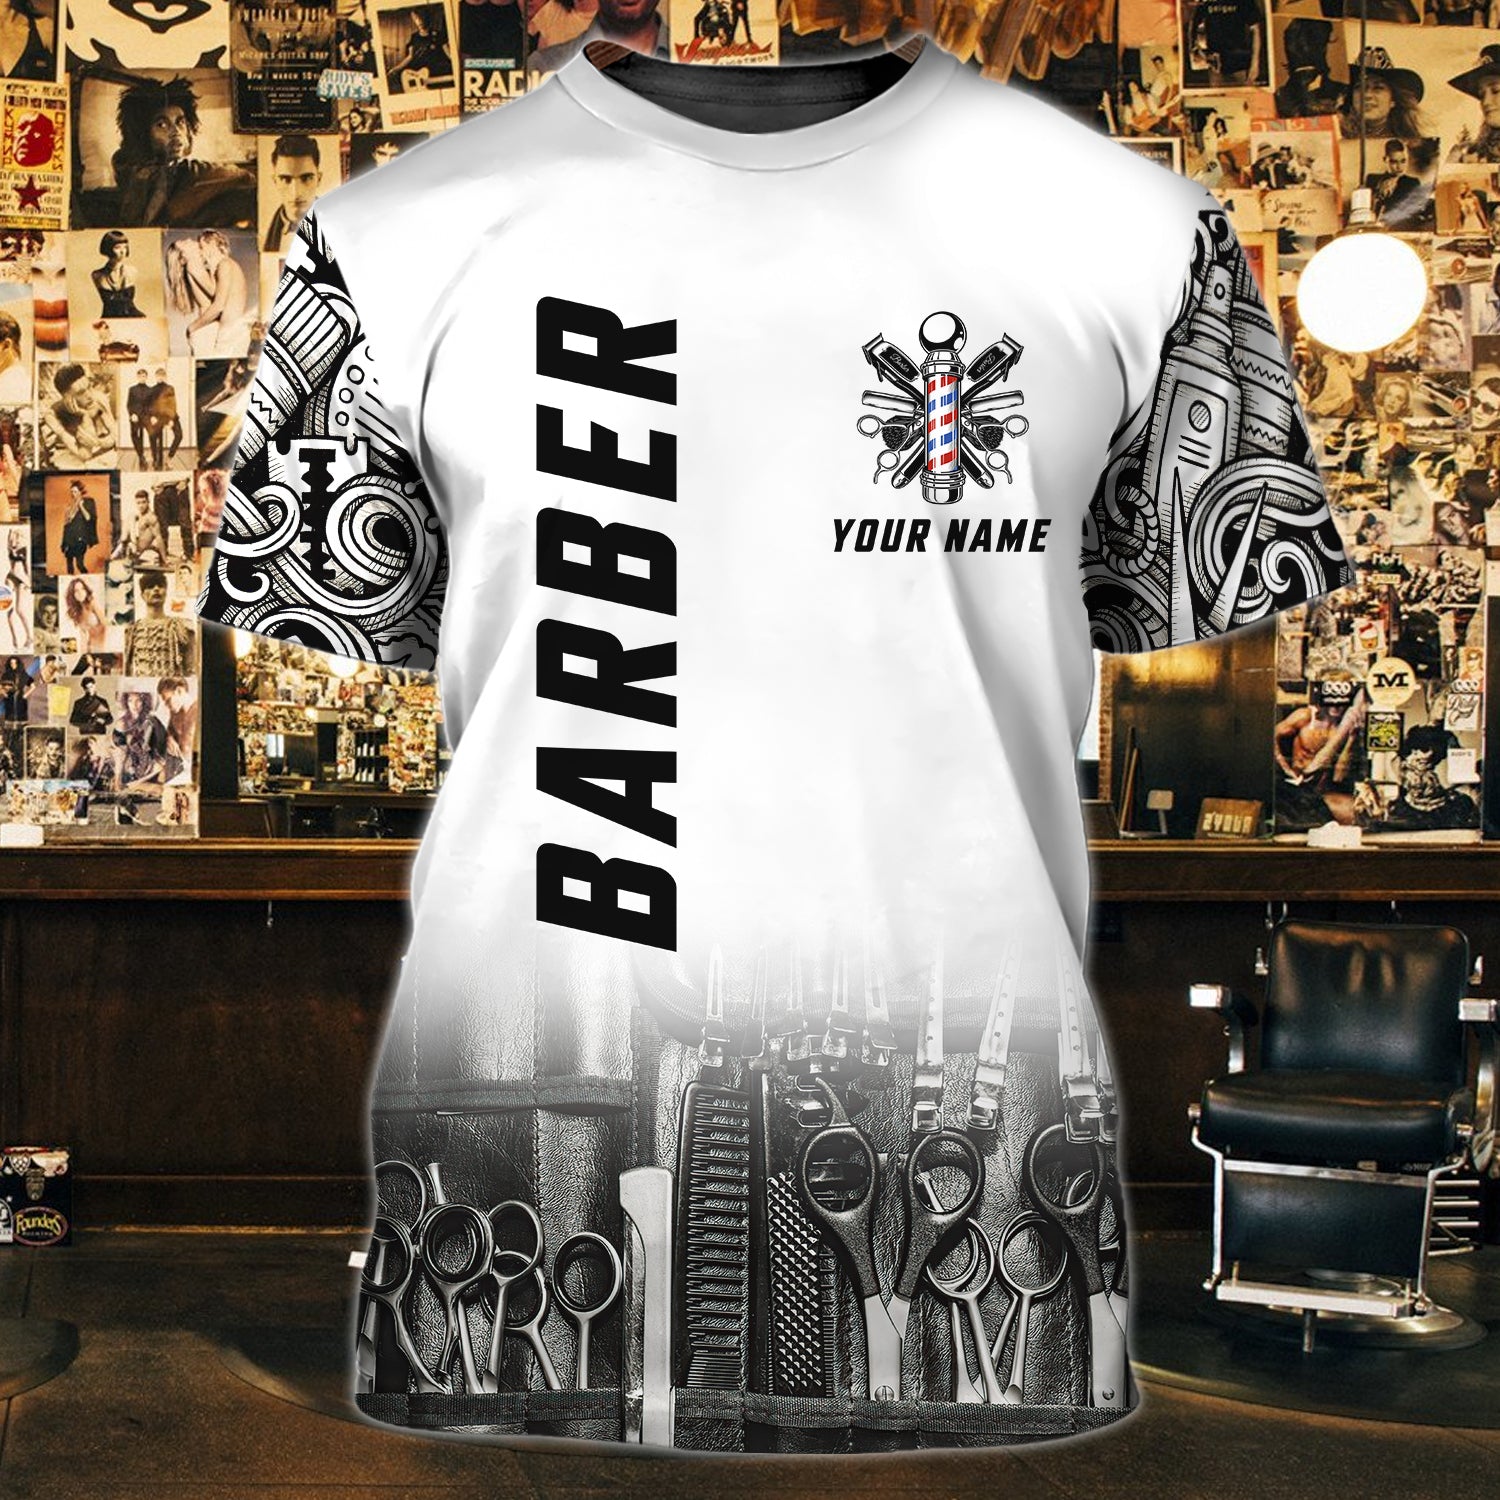 BARBER - Personalized Name 3D Tshirt 01 - RINC98